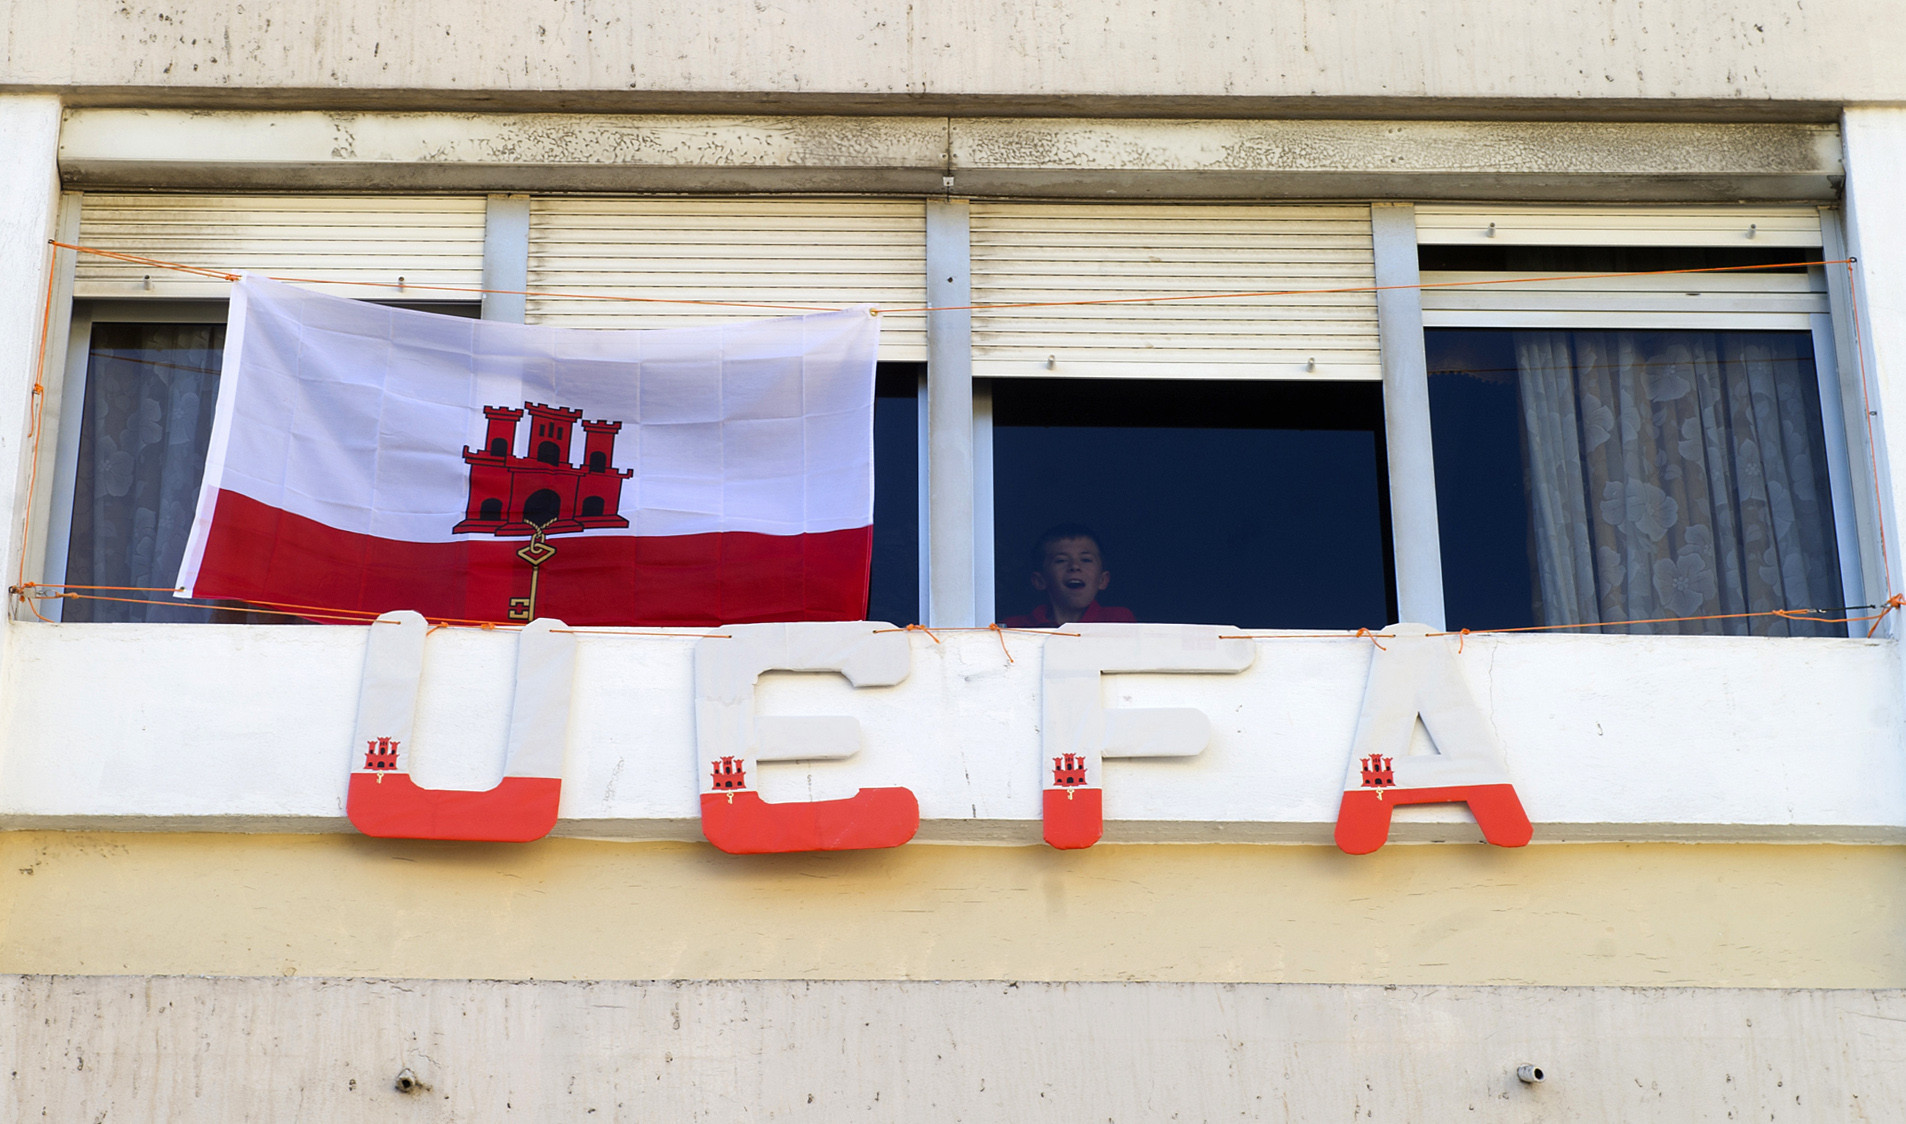 Gibraltar gained UEFA and FIFA membership after battles at the Court of Arbitration for Sport ©Getty Images